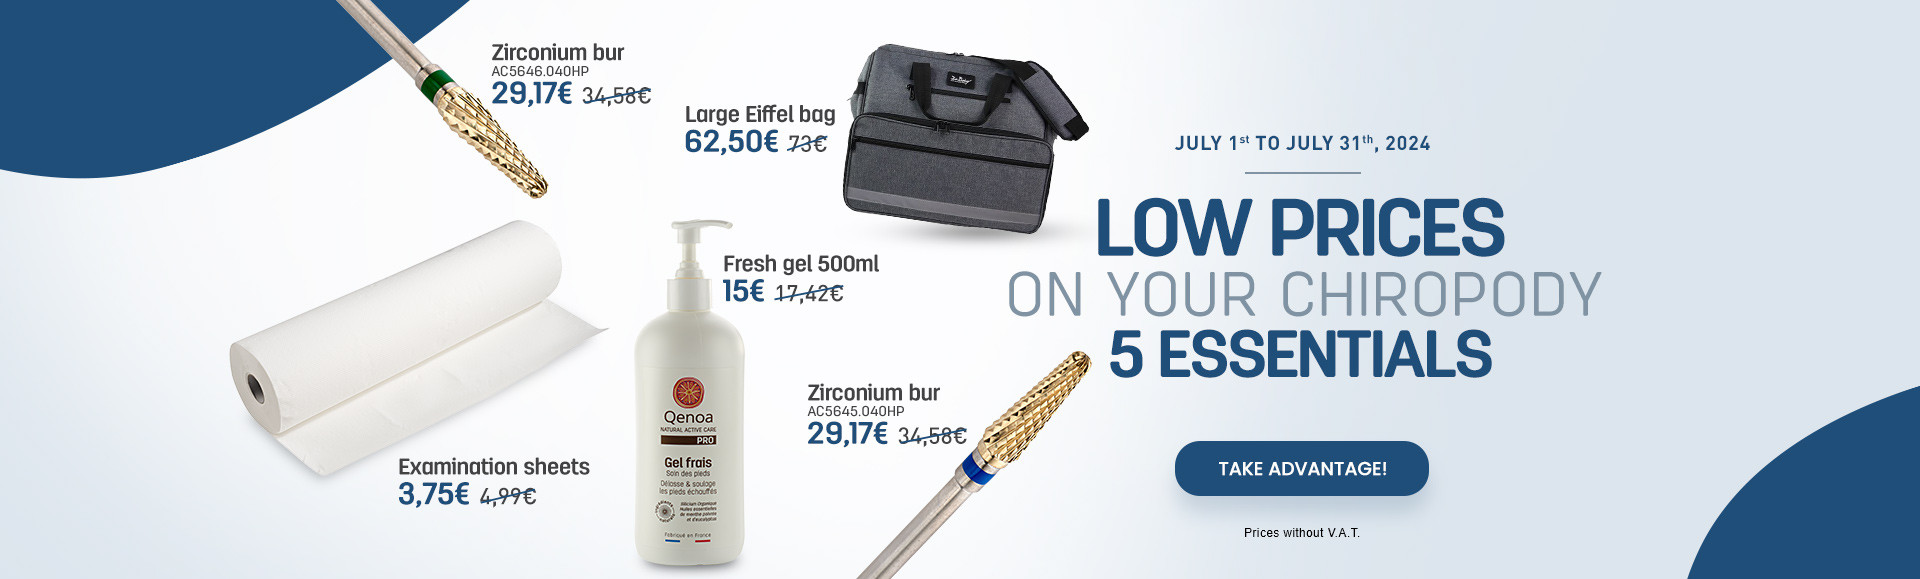 Discover the 5 chiropody essentials until July 31th